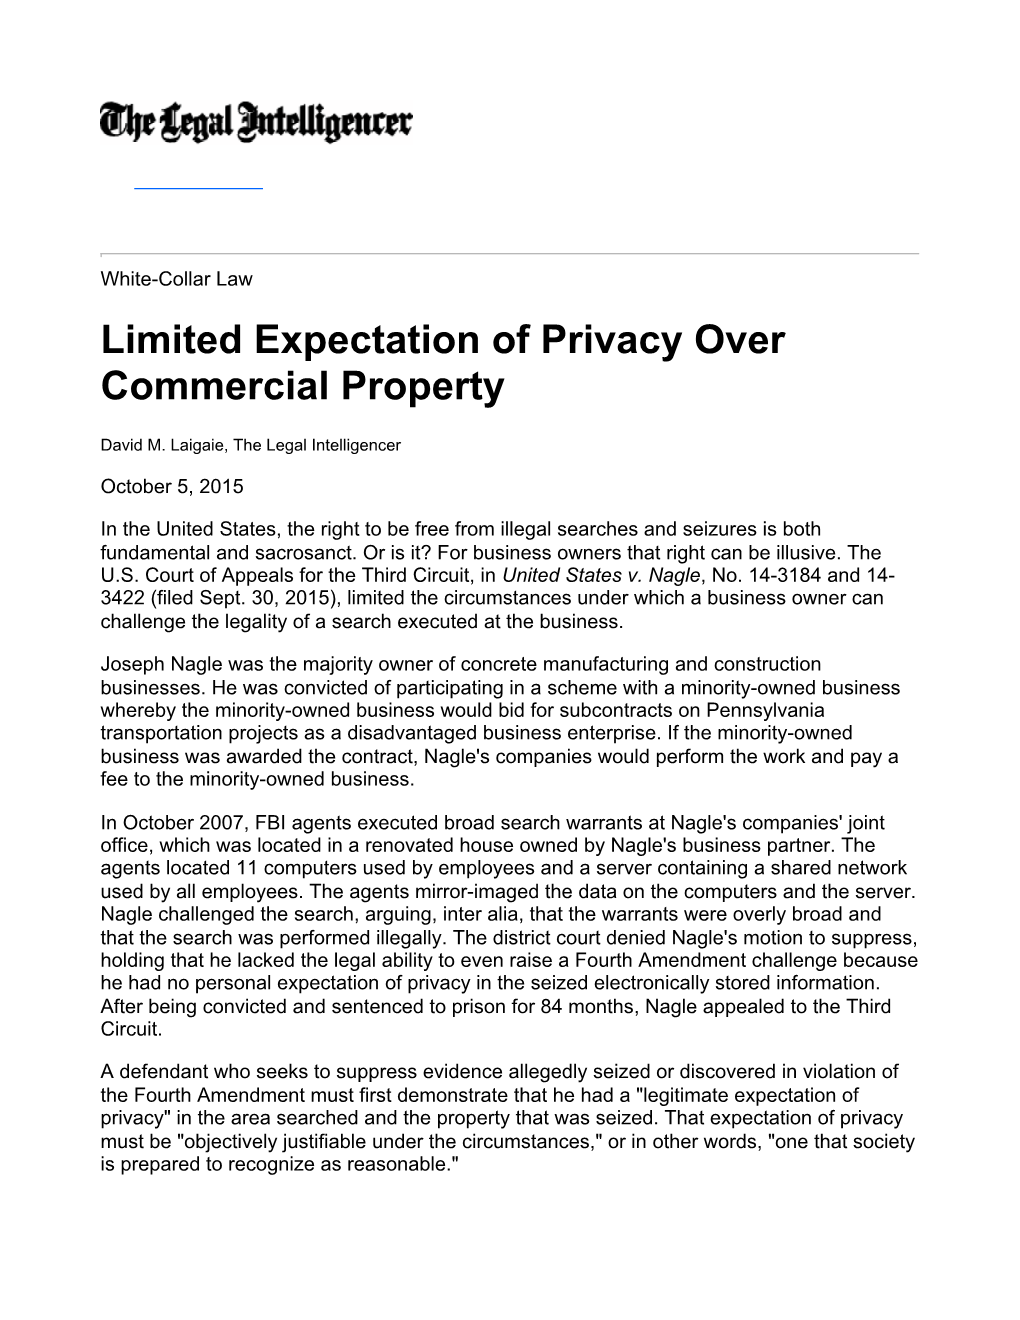 Limited Expectation of Privacy Over Commercial Property